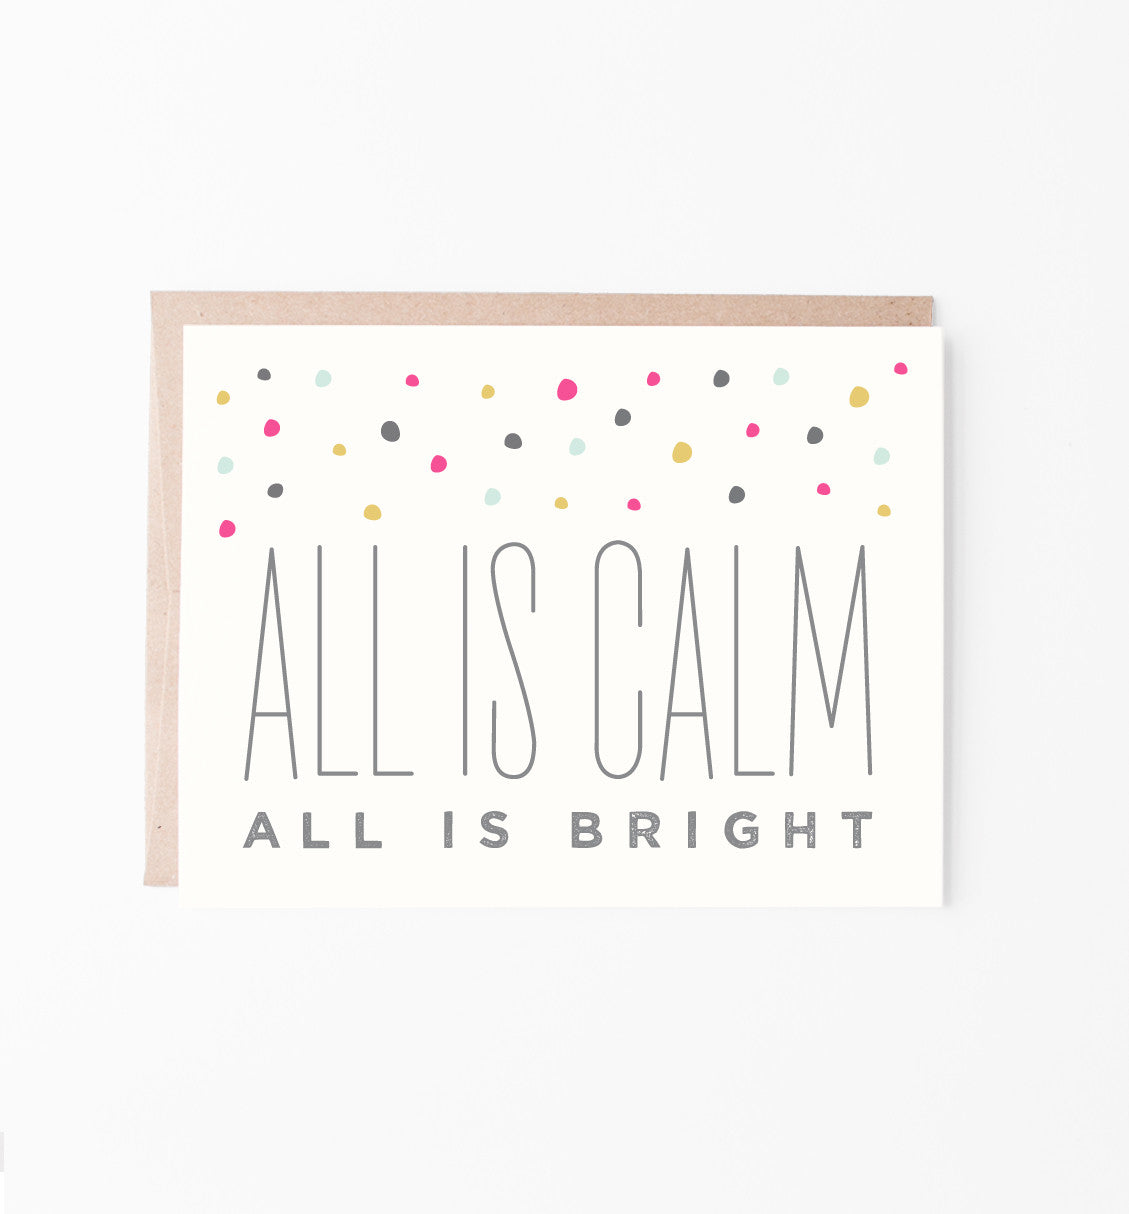 All is Bright holiday card